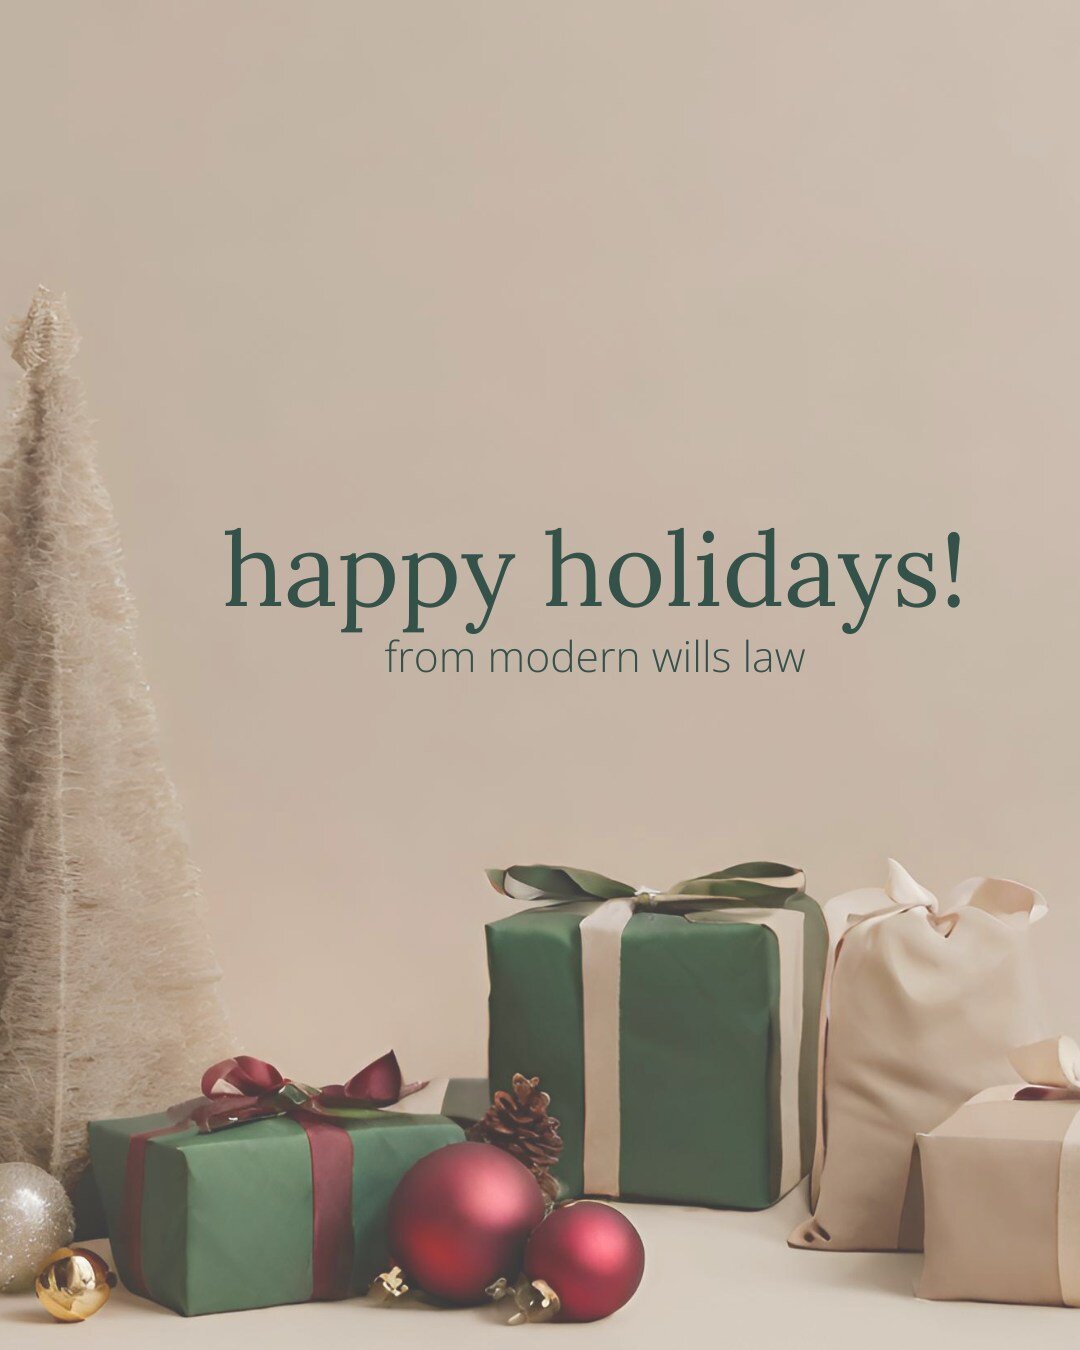 Happy Holidays from Modern Wills! Wishing you and your loved ones a joyful and restful holiday season.

Please note that our office will be closed December 22 through January 2, But we are always available online! We have free resources, address many